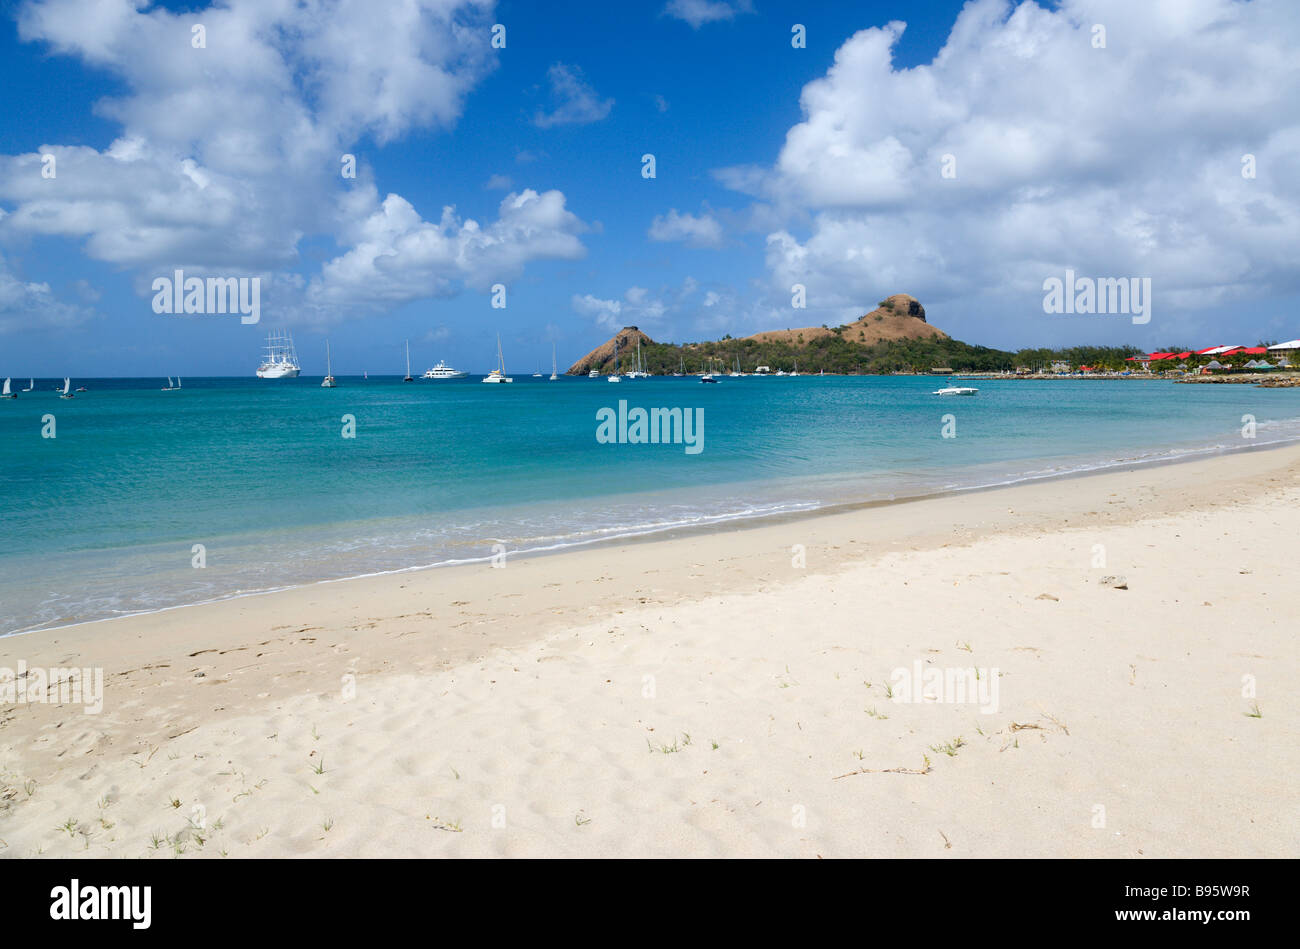 WEST INDIES Caribbean St Lucia Gros Islet Pigeon Island seen from nearby beach on causeway with yachts at anchor in Rodney Bay Stock Photo